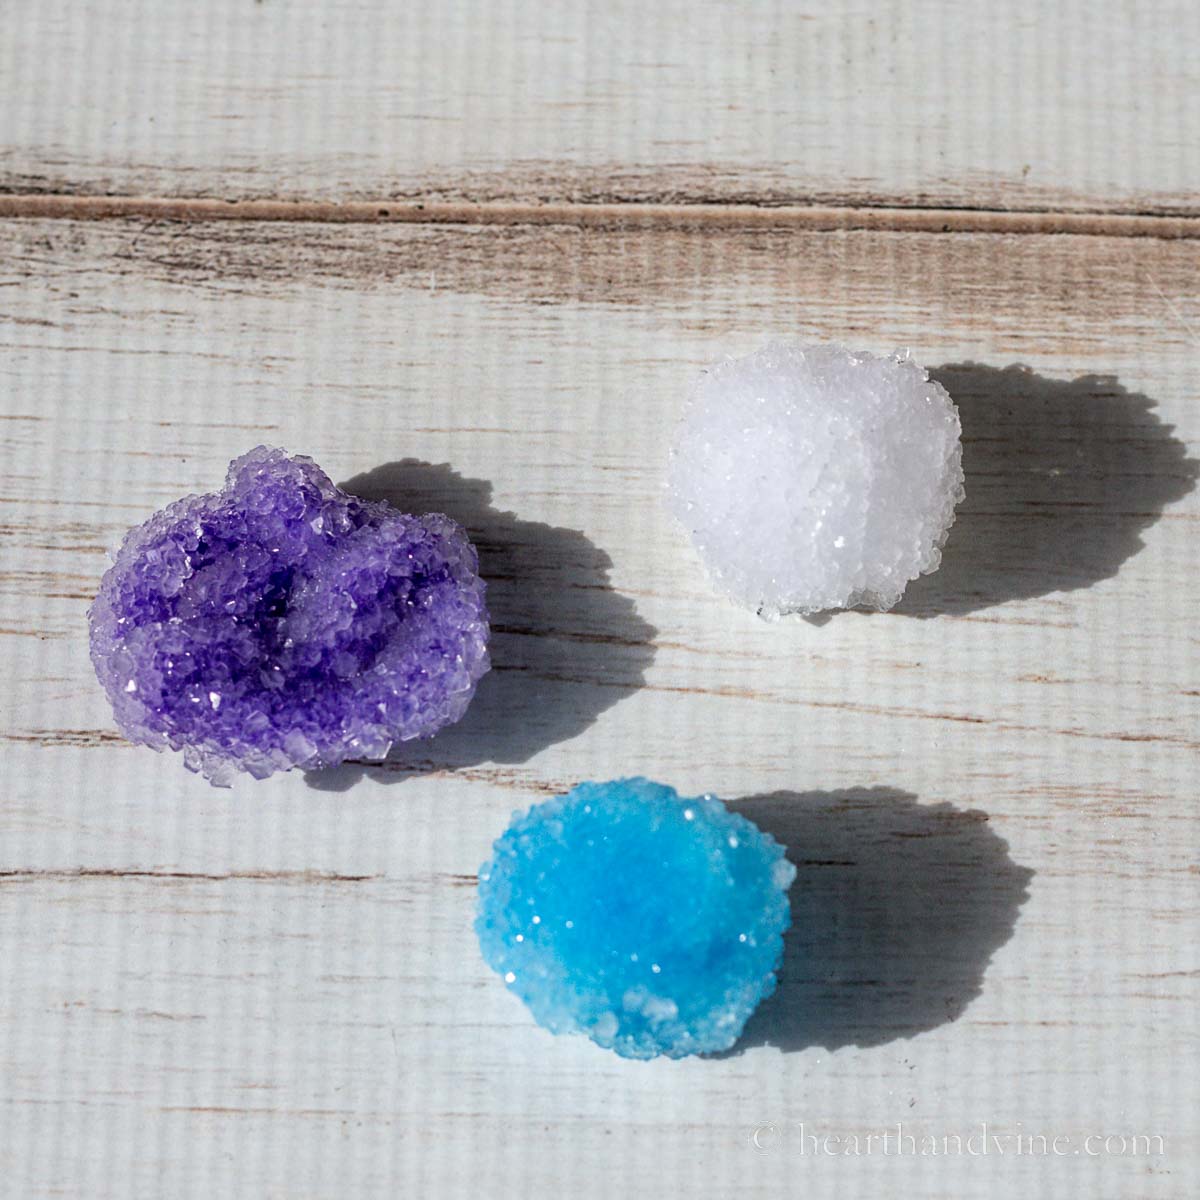 Three crystals made from Borax, pipe cleaners and craft puff balls.